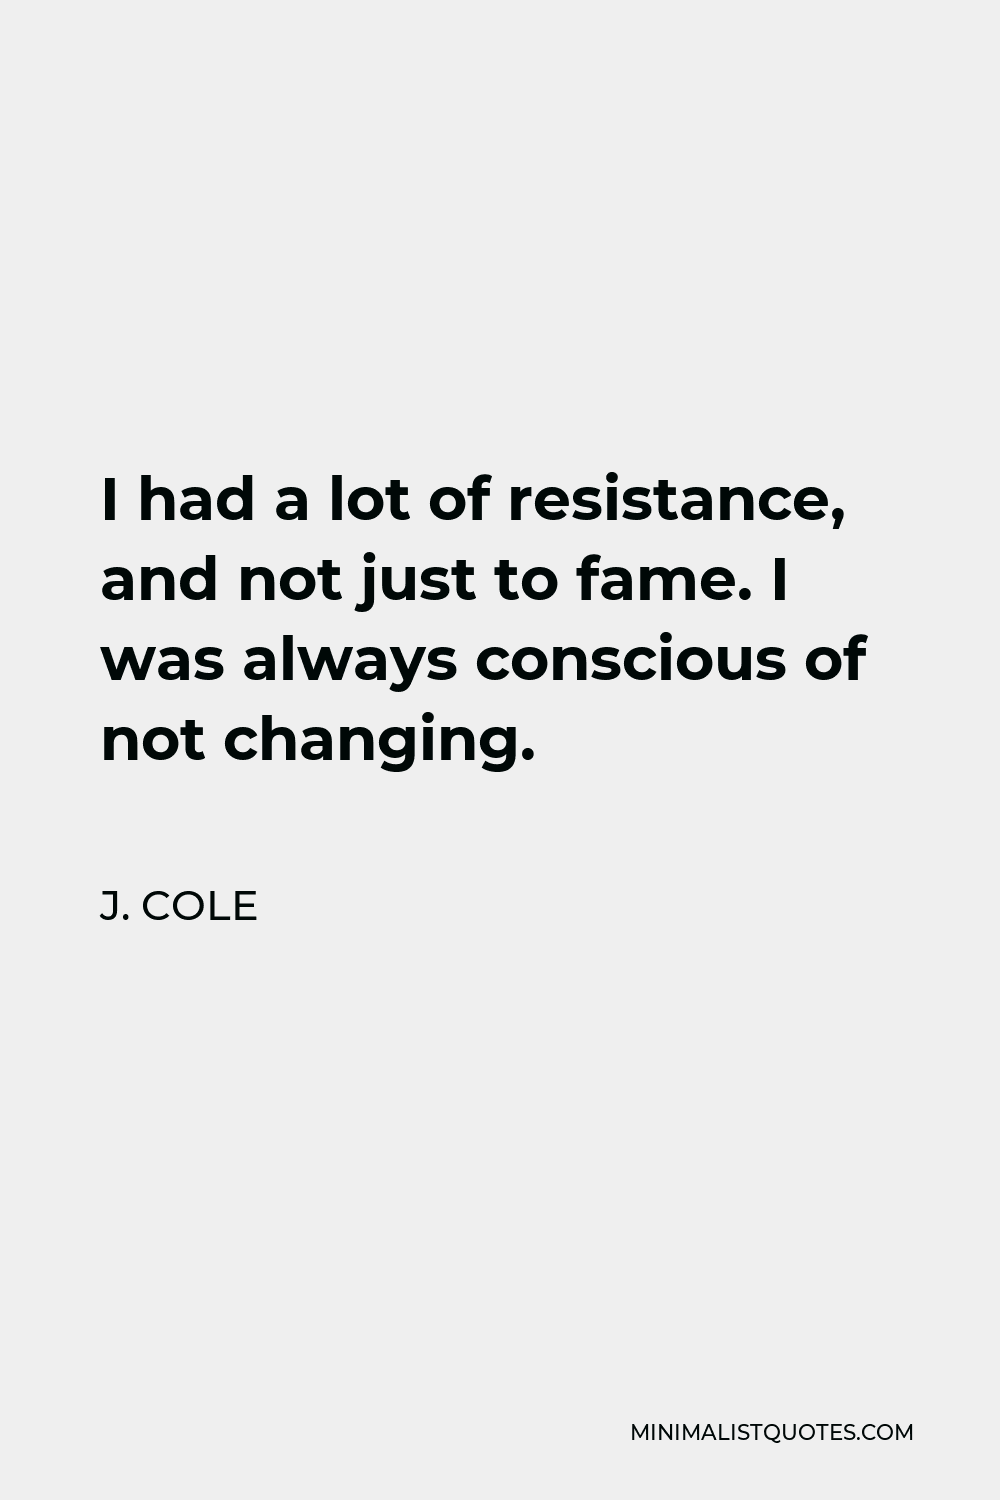 J. Cole Quote - I had a lot of resistance, and not just to fame. I was always conscious of not changing.